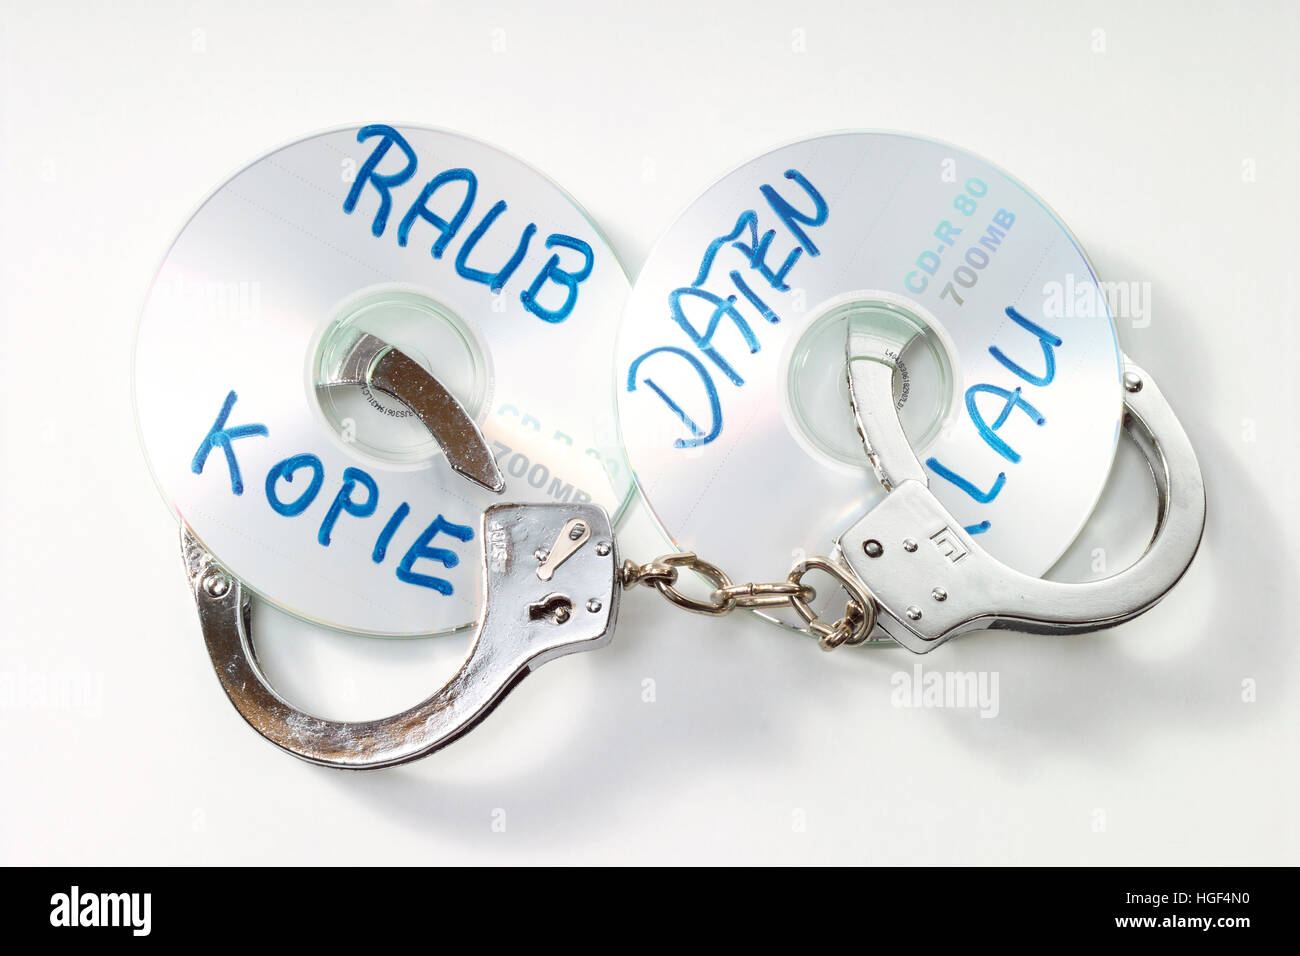 Handuffs and CD/DVD: symbolic for data theft crime Stock Photo